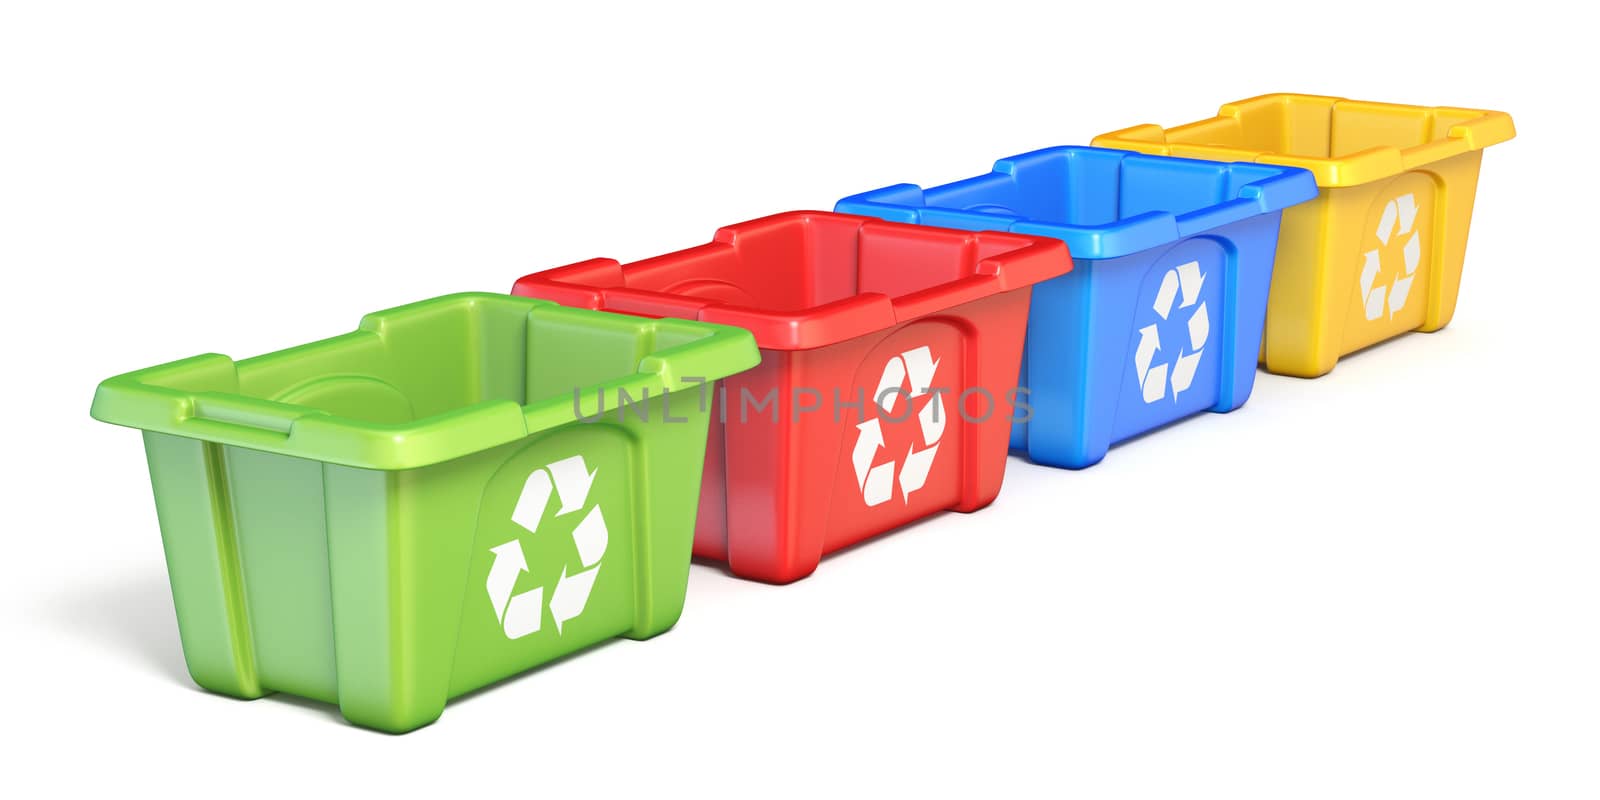 Four colorful recycle bins 3D rendering illustration isolated on white background